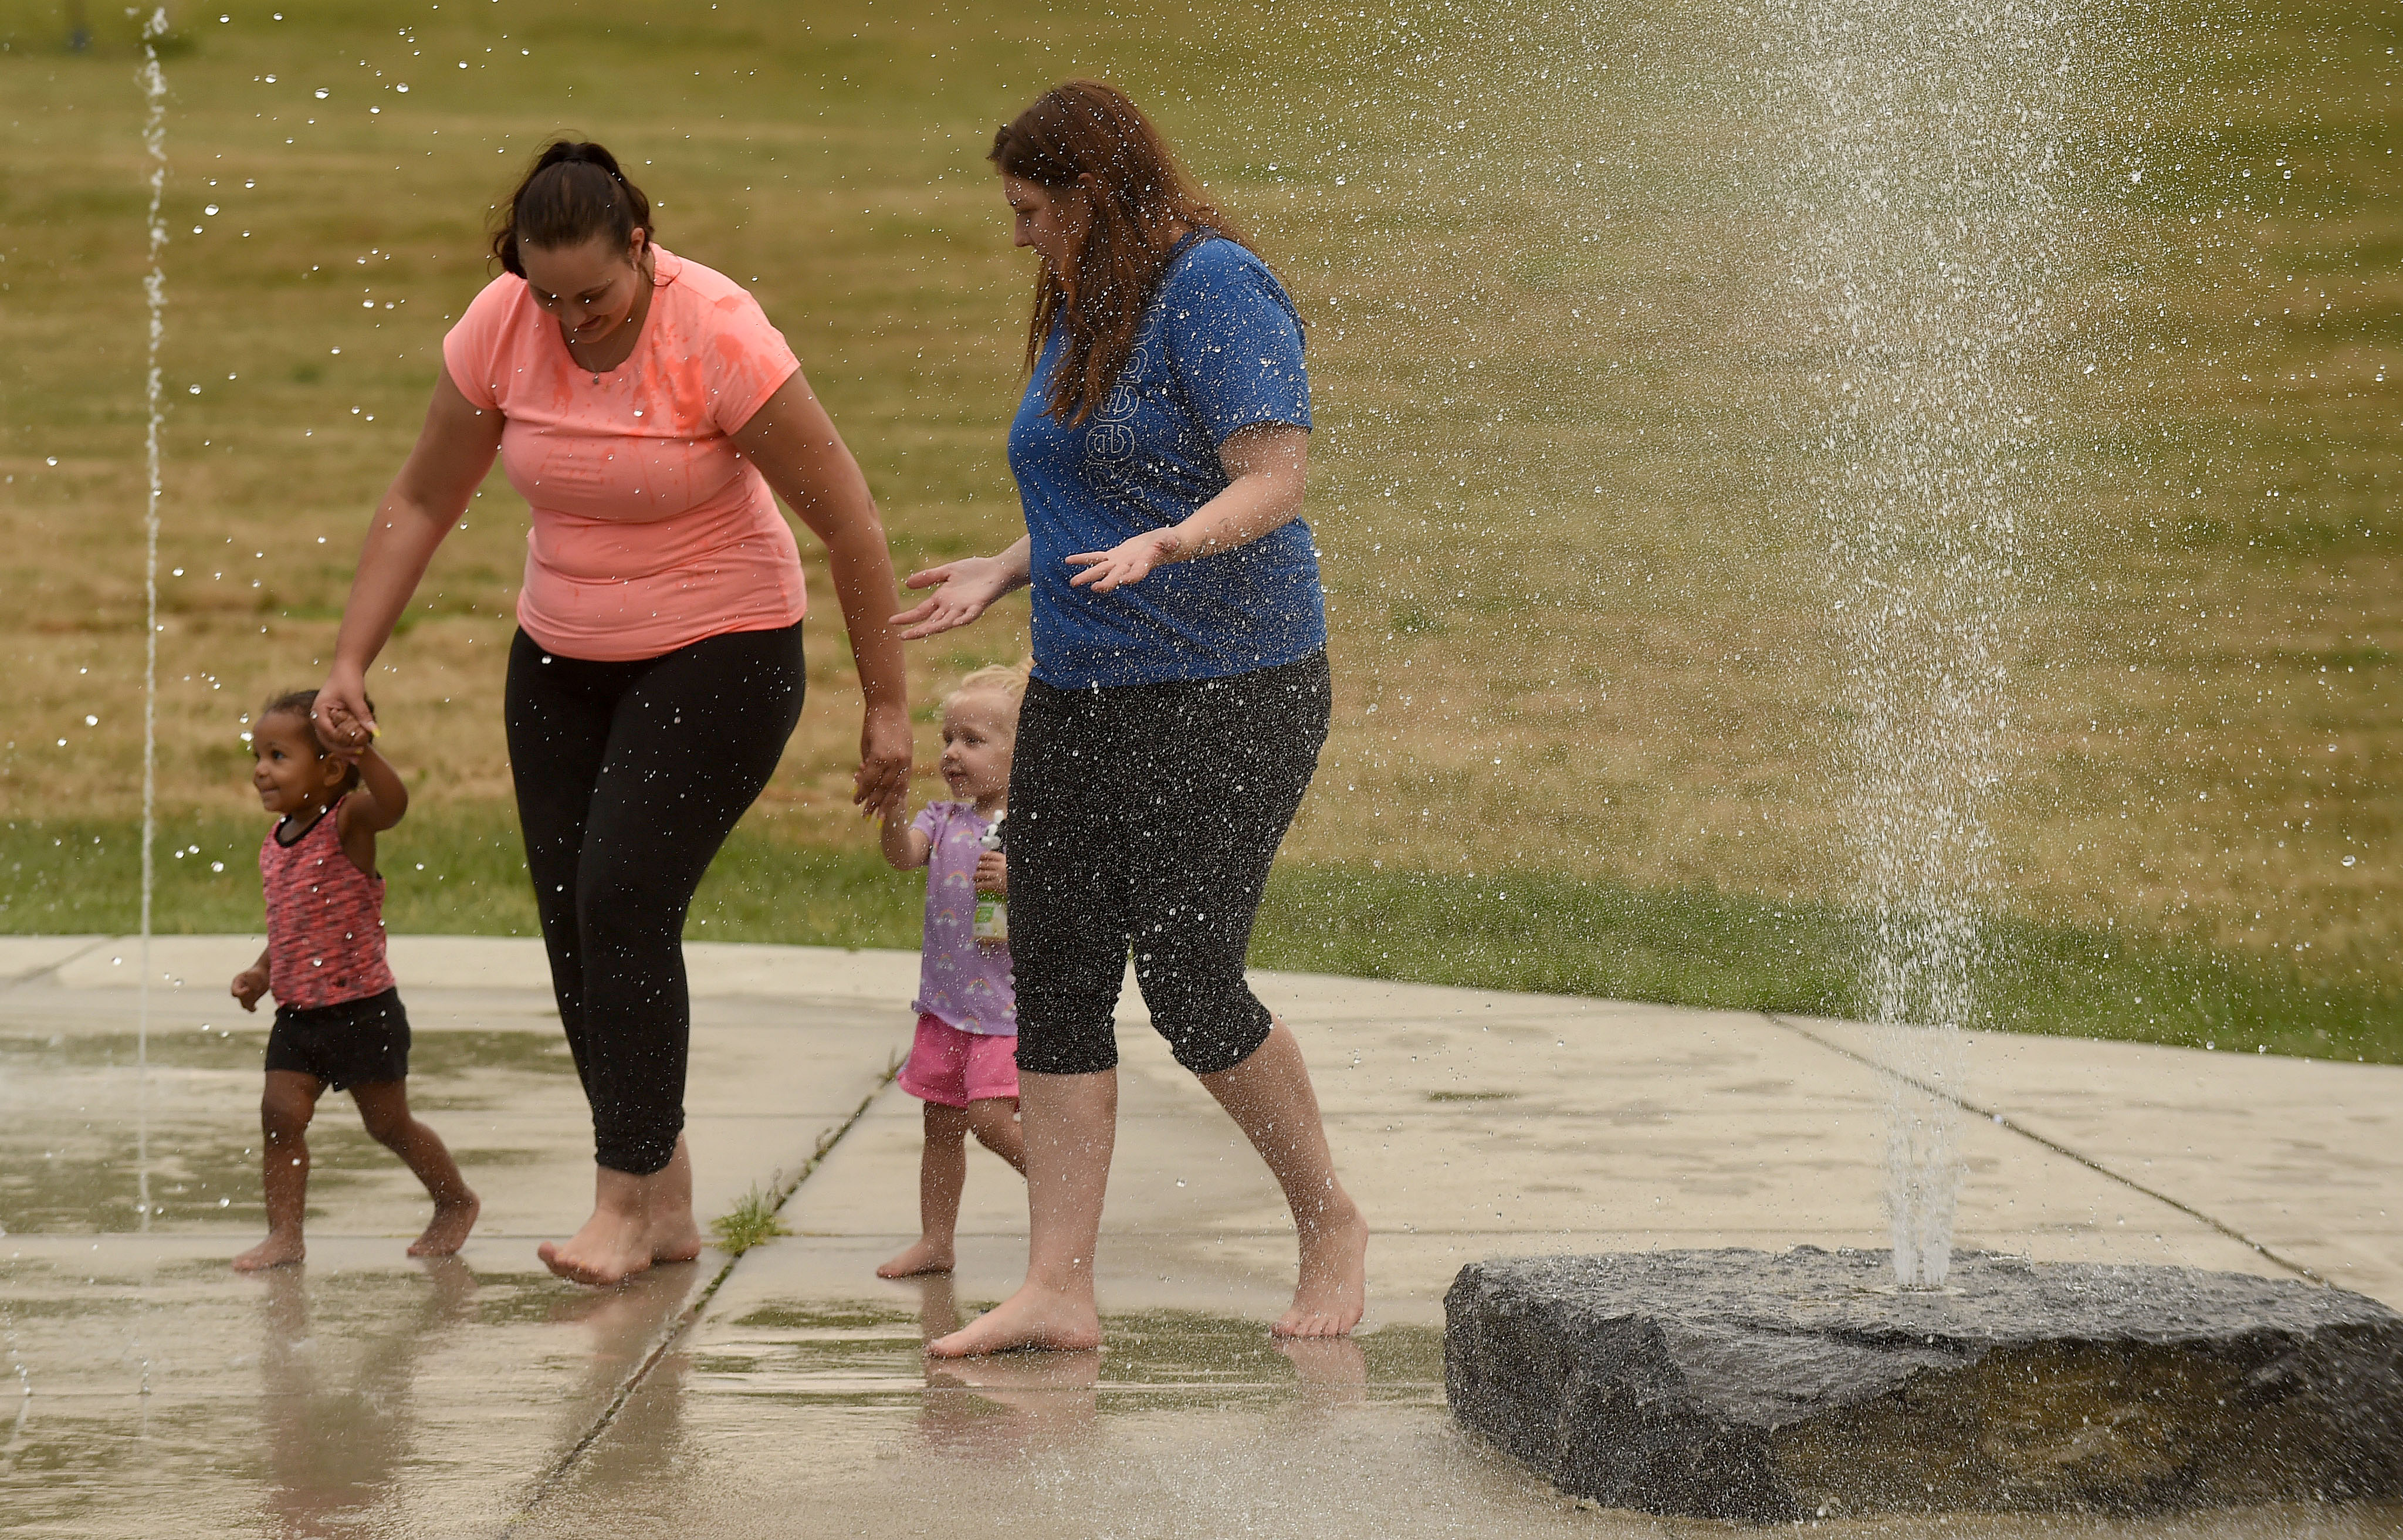 People are still looking for a way to cool down during a heat spell in Syracuse, July 8, 2020.  From left,  Harley Botame 1 1\2 ,  mom Ashley Silvernal, Avalynn Euson 11\2 and mom Shana Lovine walk through the spray area in Lower Onondaga Park.  Dennis Nett | dnett@syracuse.com